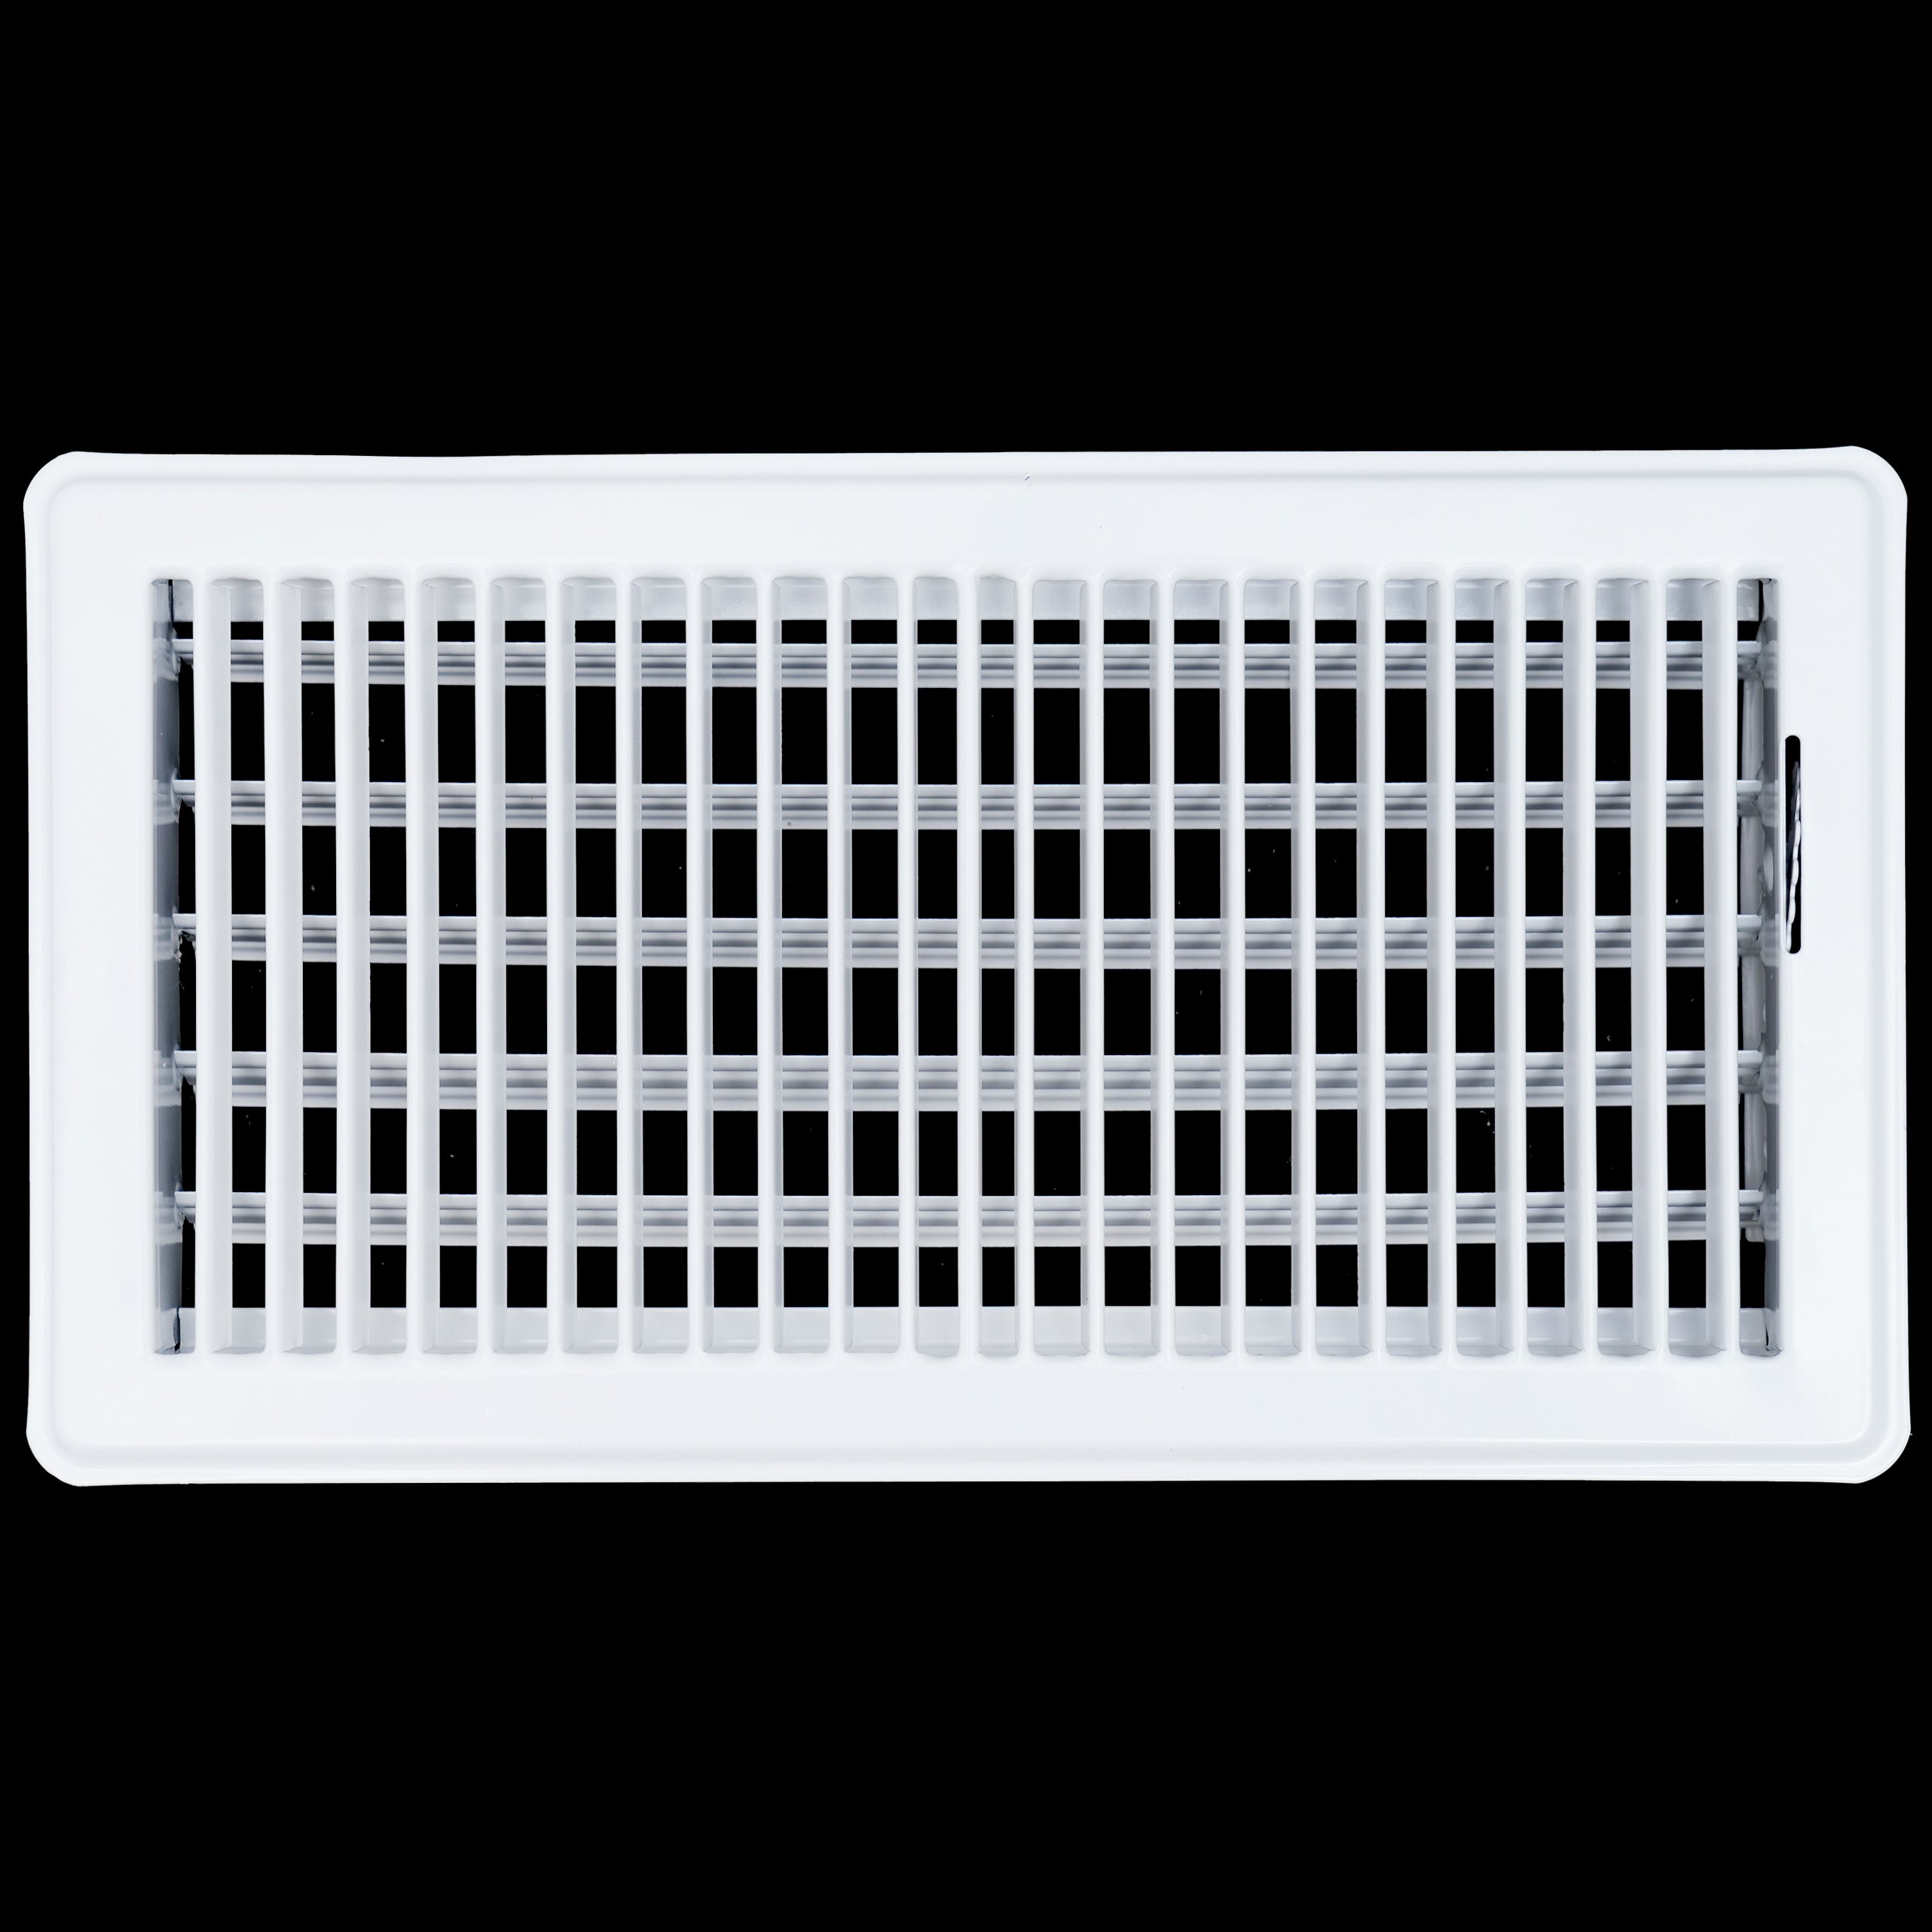 airgrilles 6" x 12" floor register with louvered design heavy duty walkable design with damper floor vent grille easy to adjust air supply lever white hnd-flg-wh-6x12  1